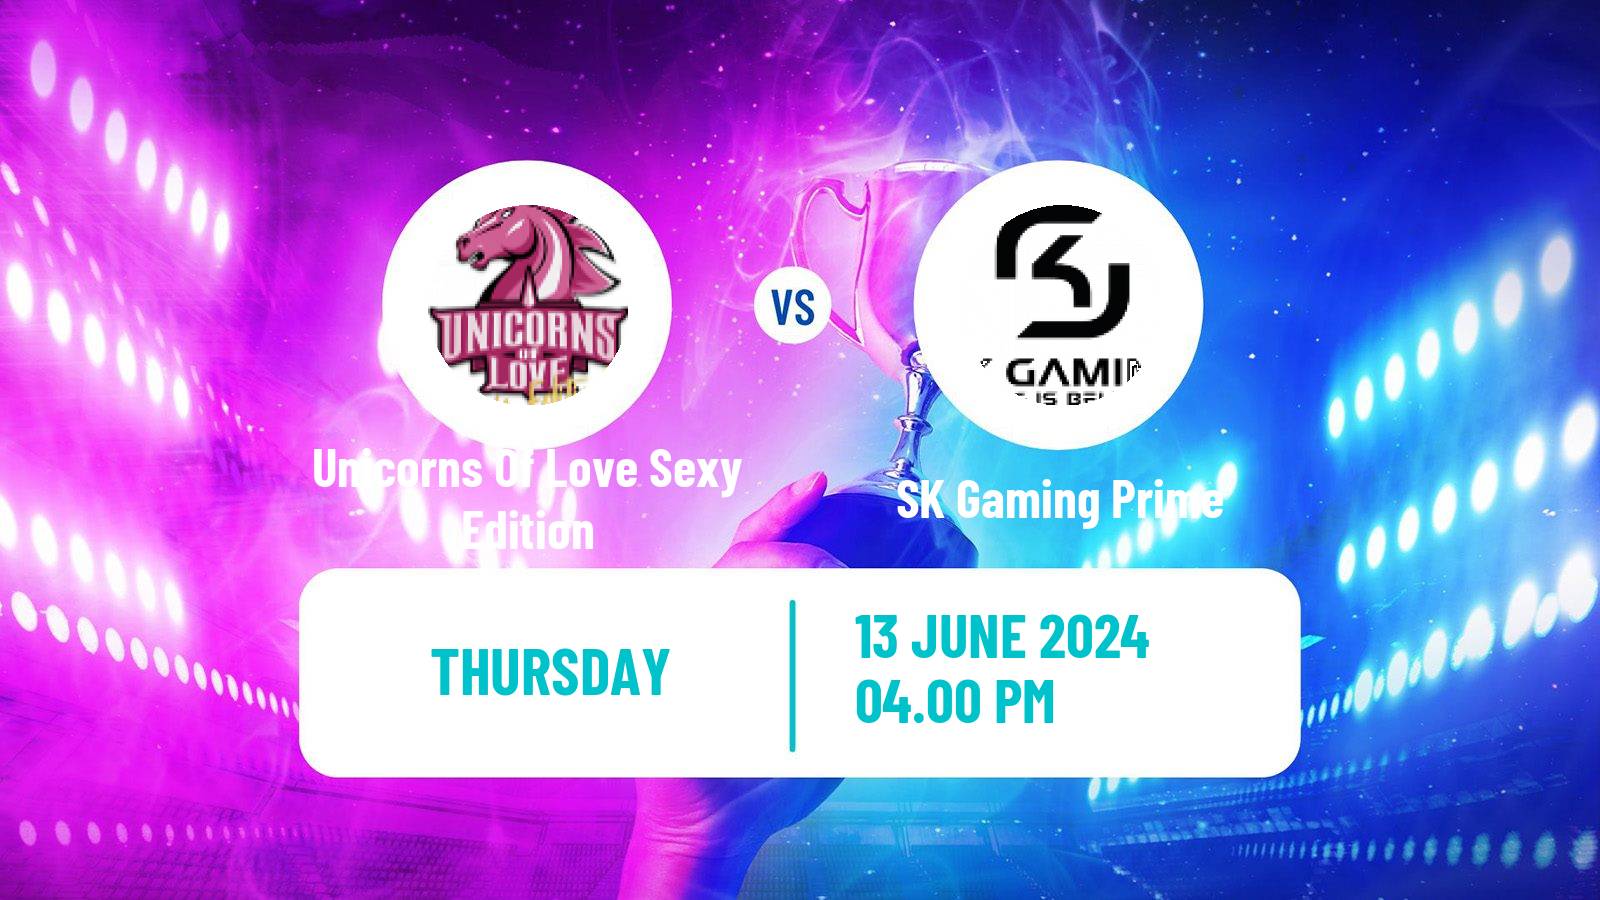 Esports League Of Legends Prime League Unicorns Of Love Sexy Edition - SK Gaming Prime